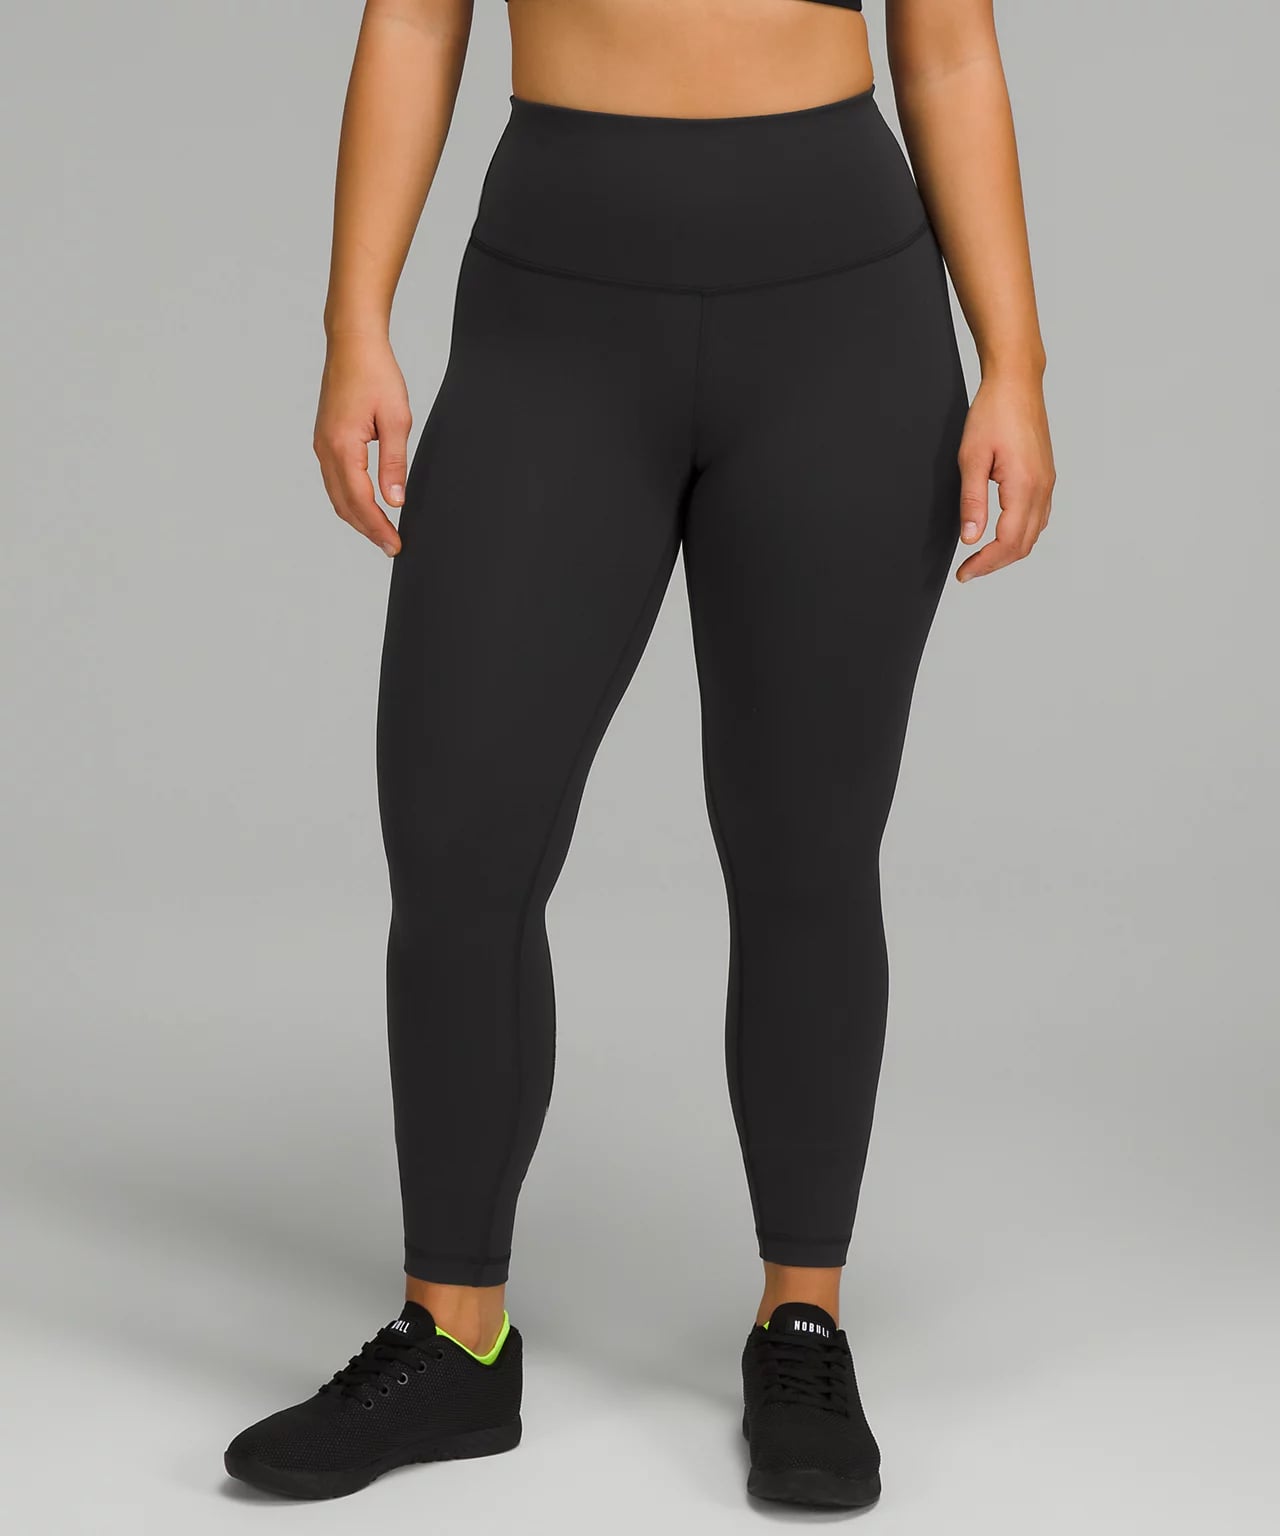 What Are You Supposed to Wear Under Your Lulu B Leggings? – A'Tu